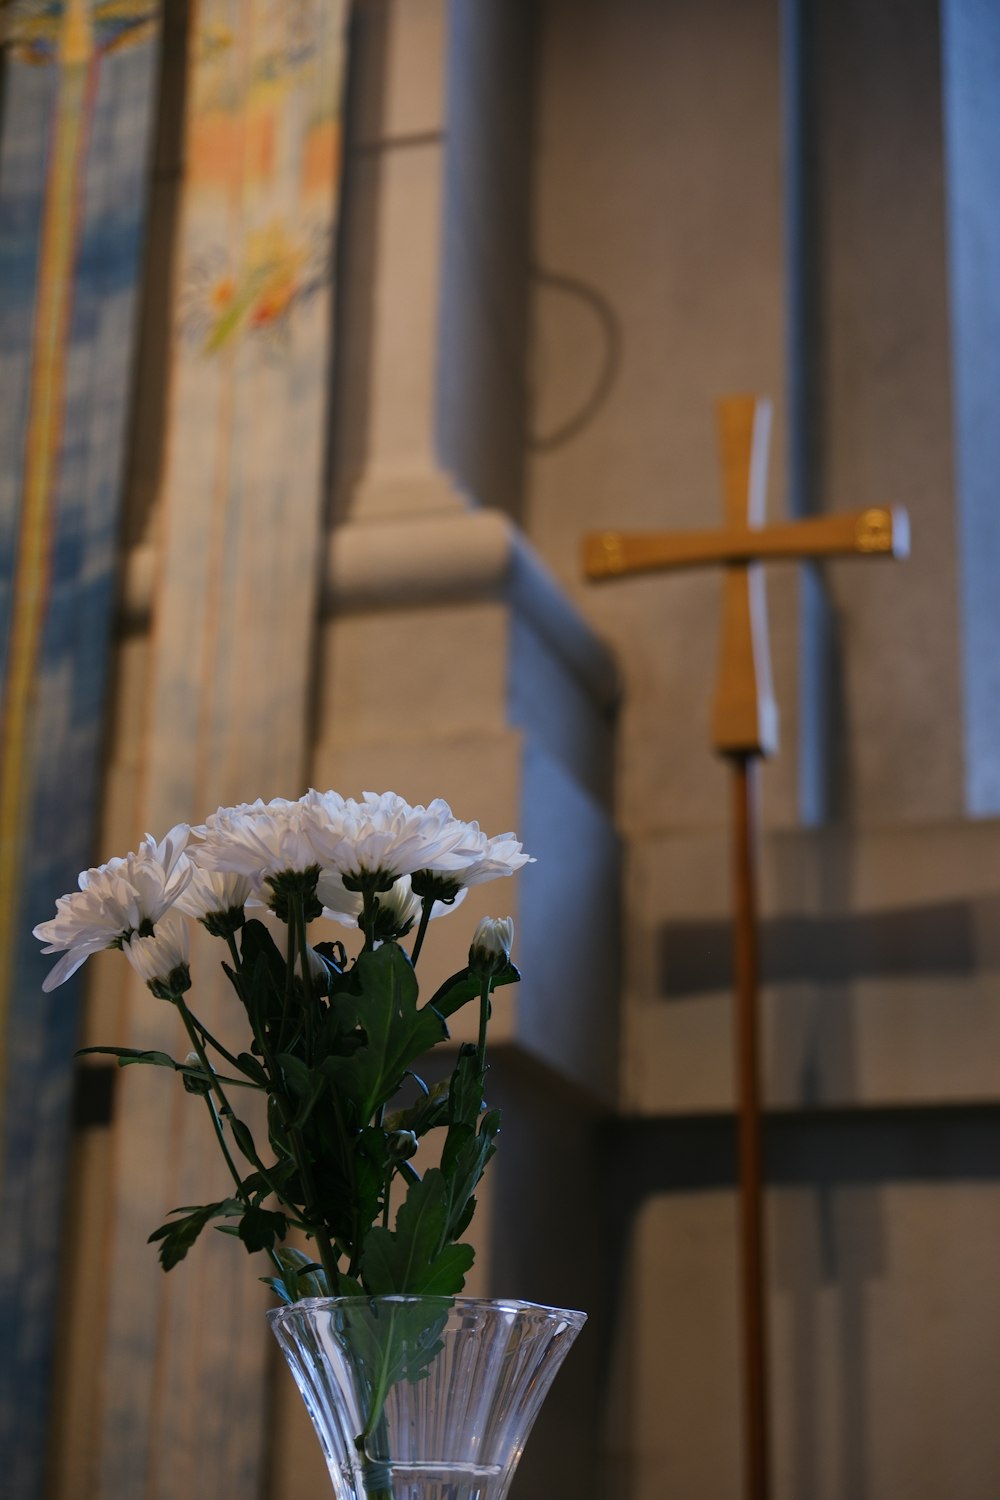 a vase filled with white flowers next to a cross